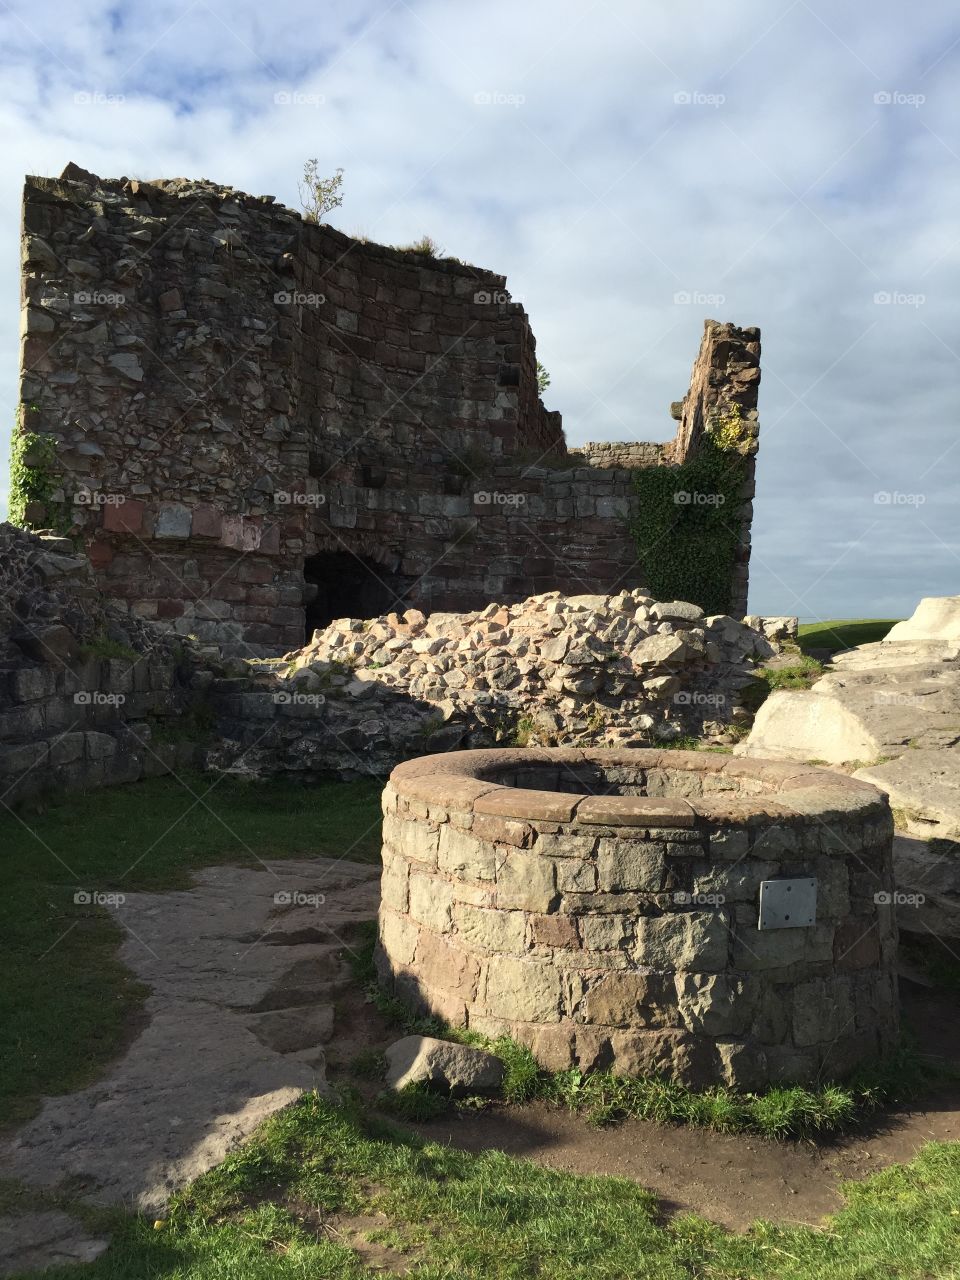 Well, well, well.... Beeston castle siege protection